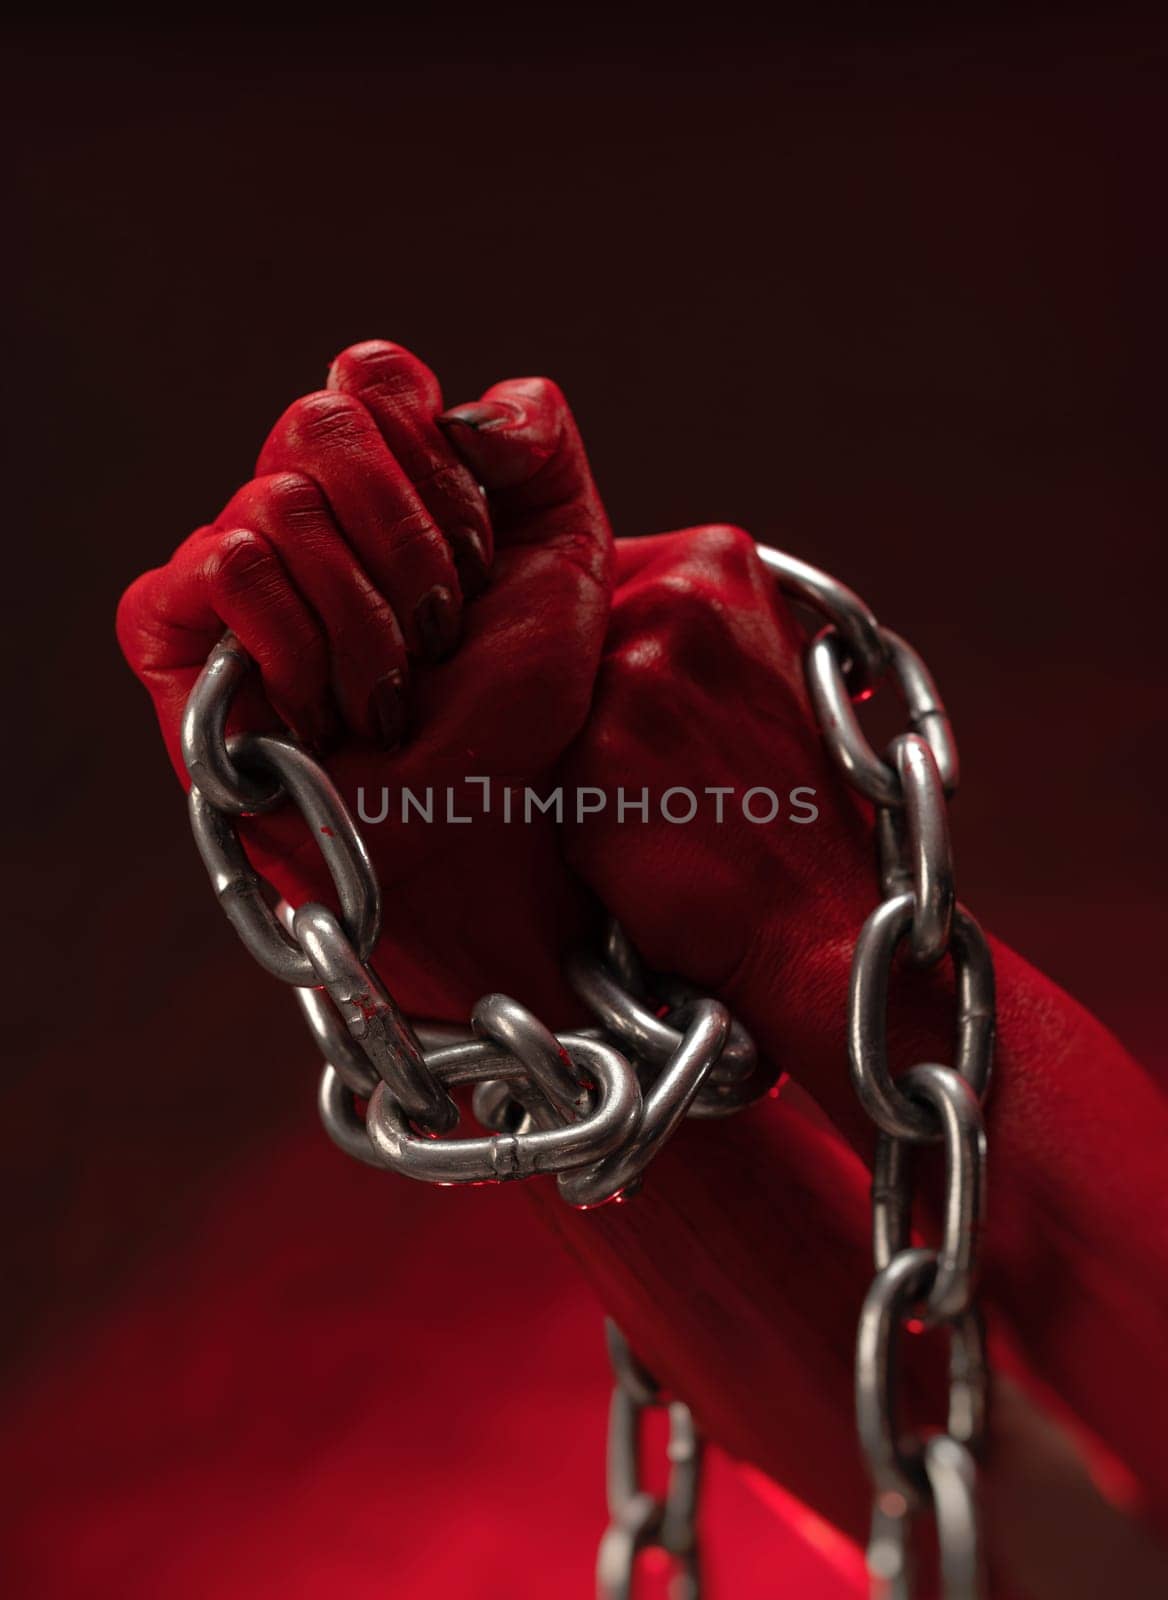 bloodied hands clenched into fists in the shackles of a metal chain symbolize slavery, protest and struggle for freedom